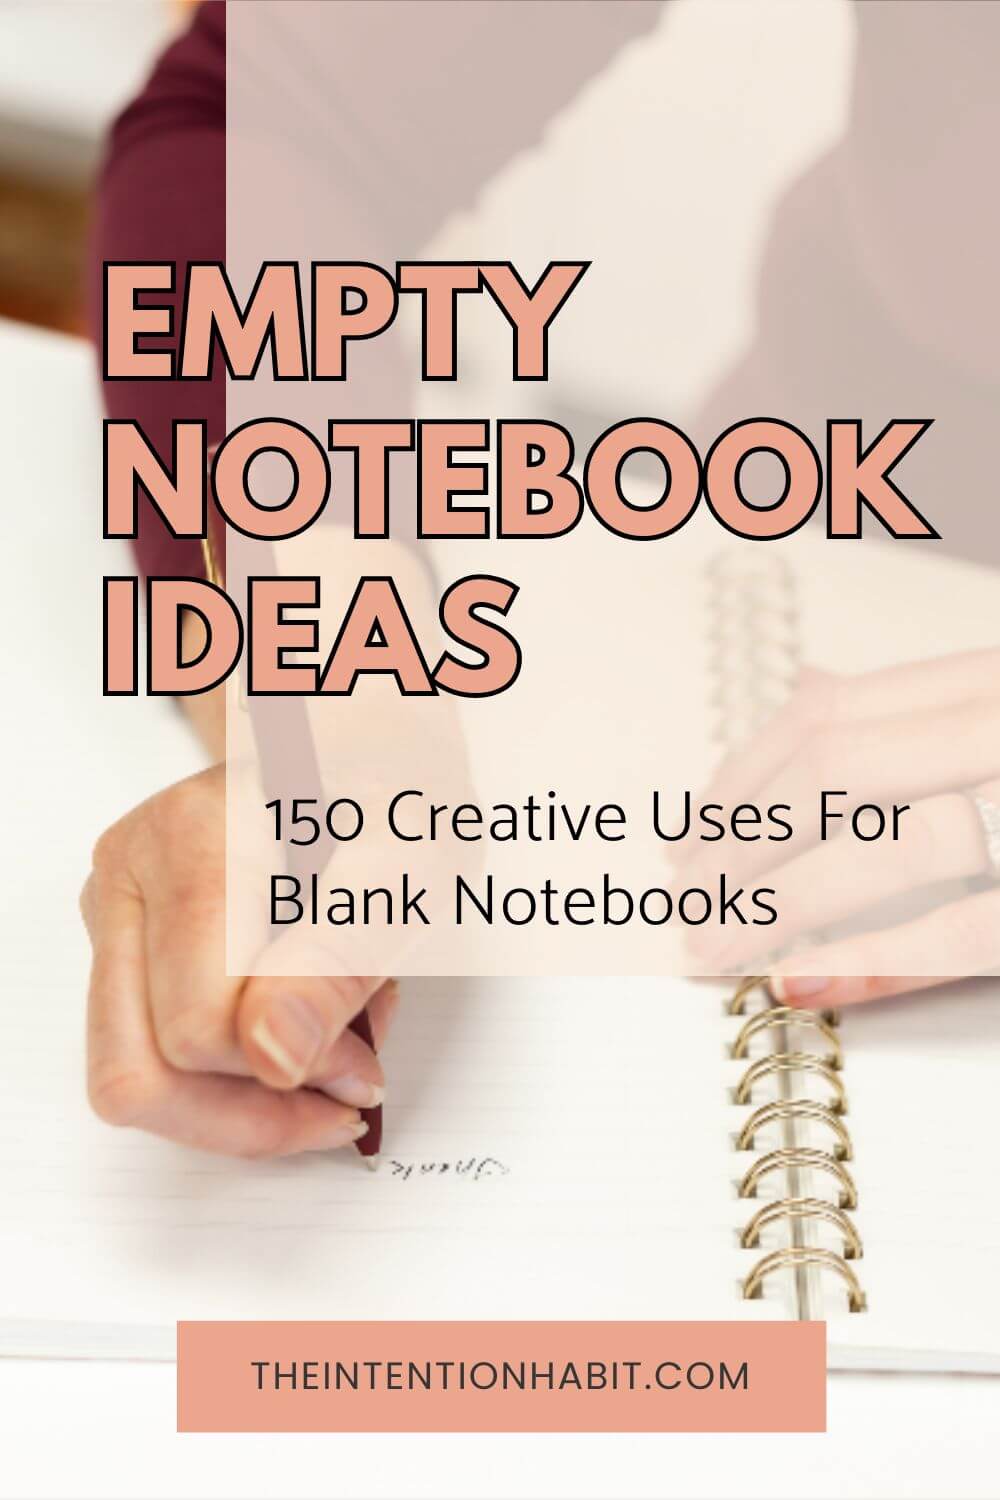 150 empty notebook ideas uses for empty notebooks.